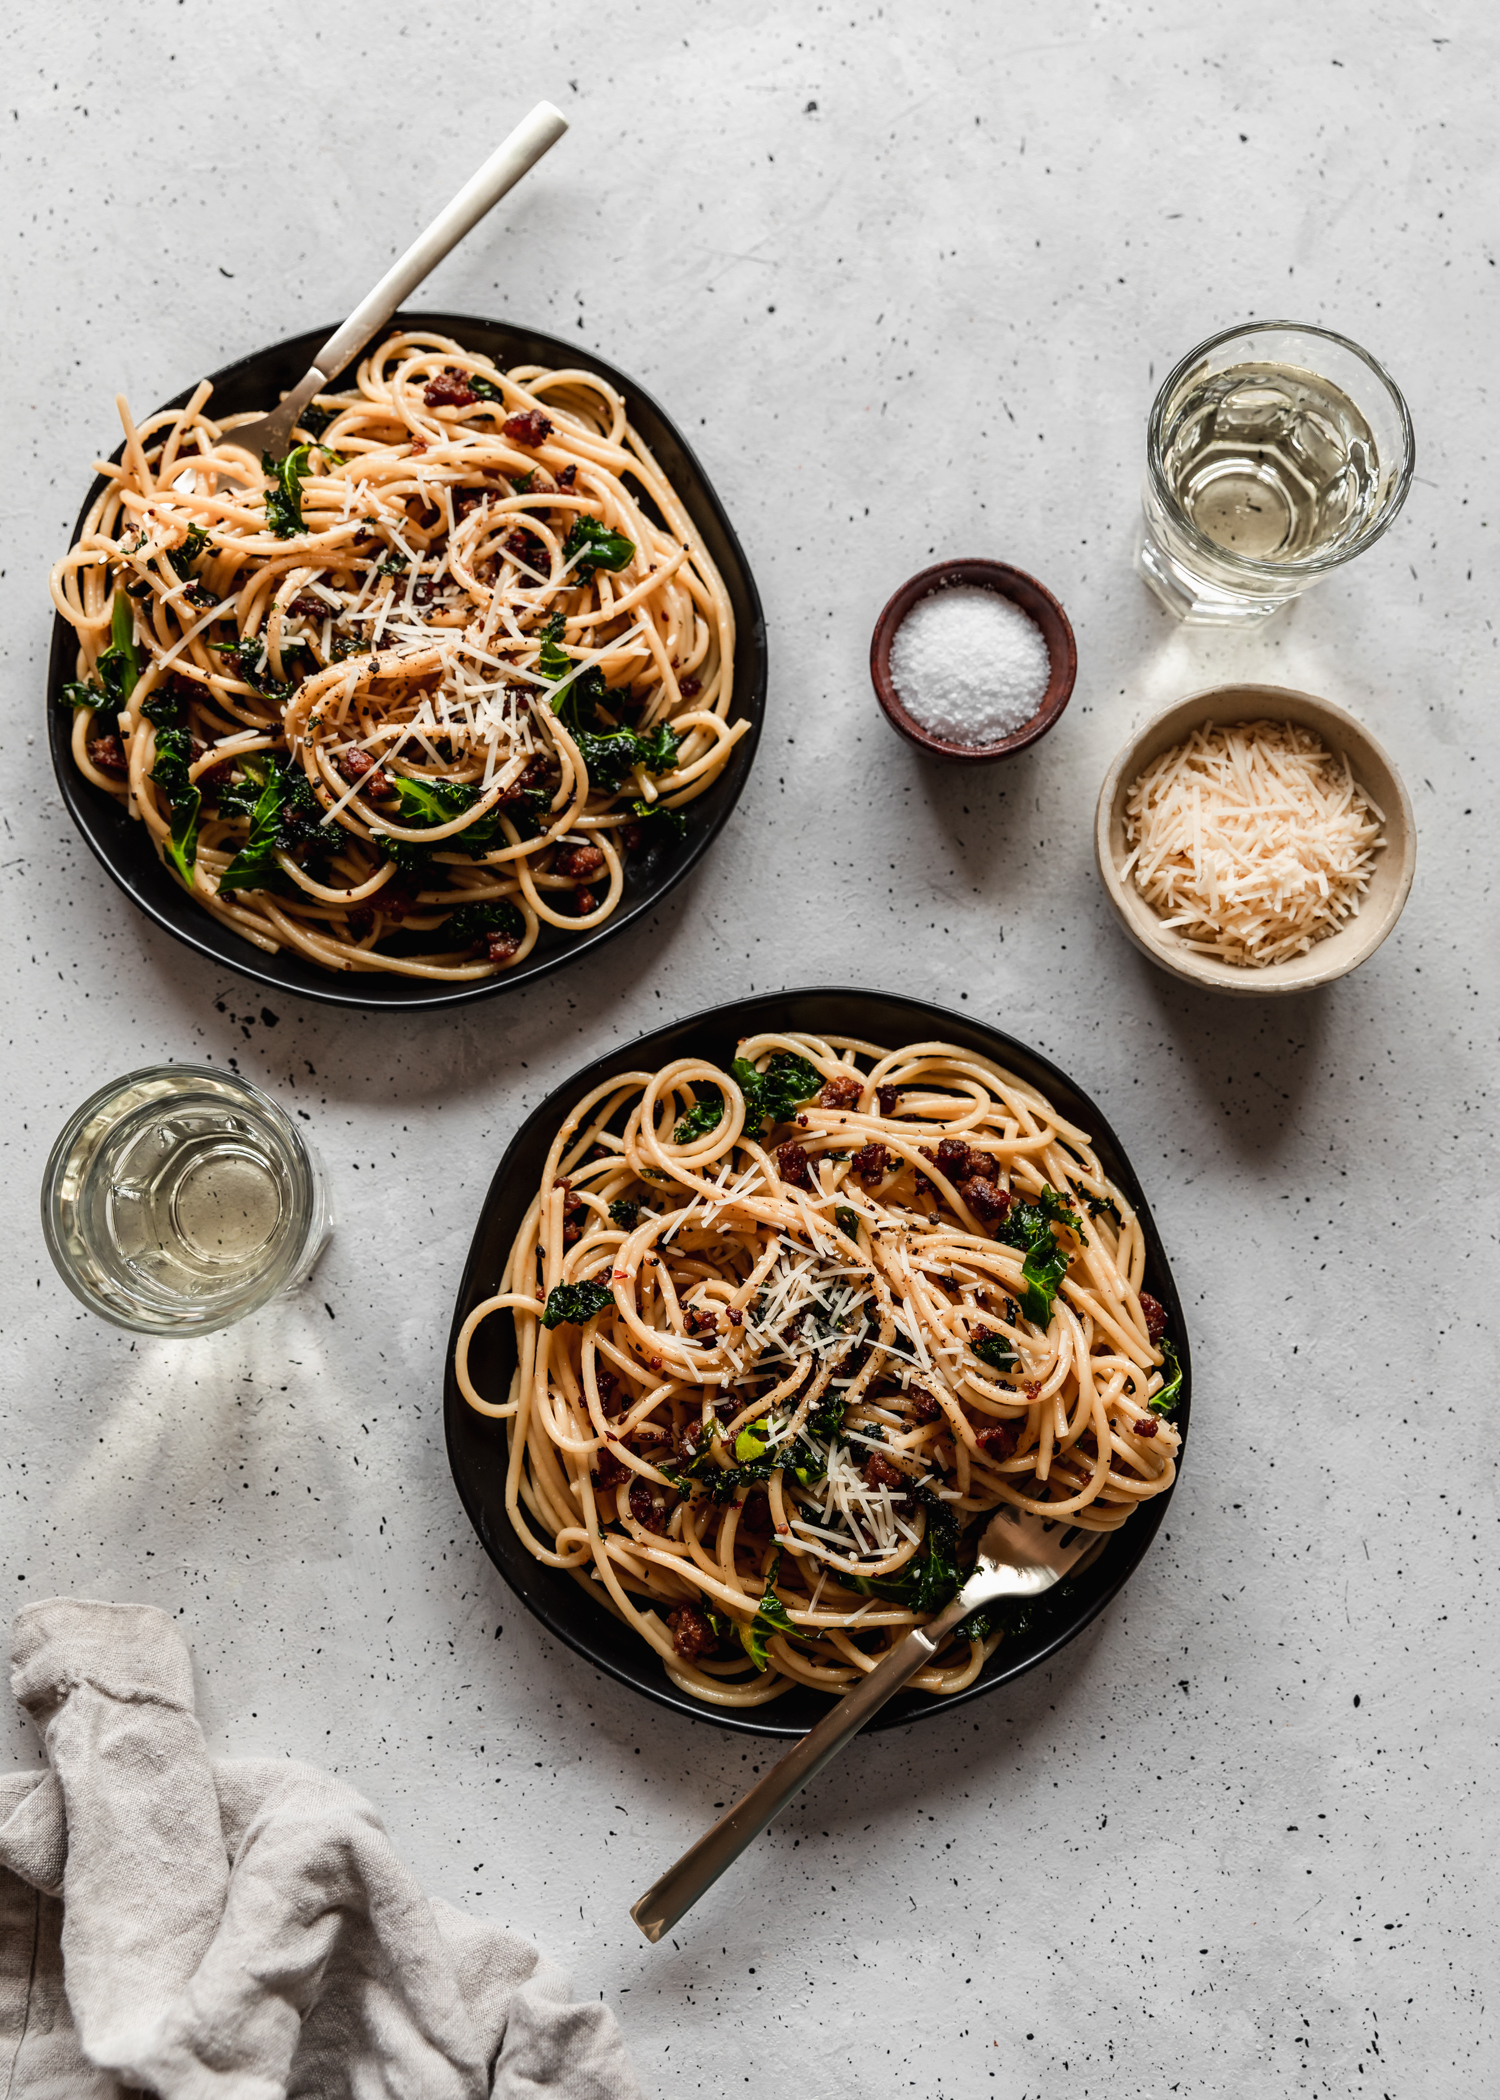 An overhead image of two plates of pasta with ground pork and greens on a grey table surrounded by white wine, a bowl of parmesan, a grey linen, and a small wood bowl with salt.